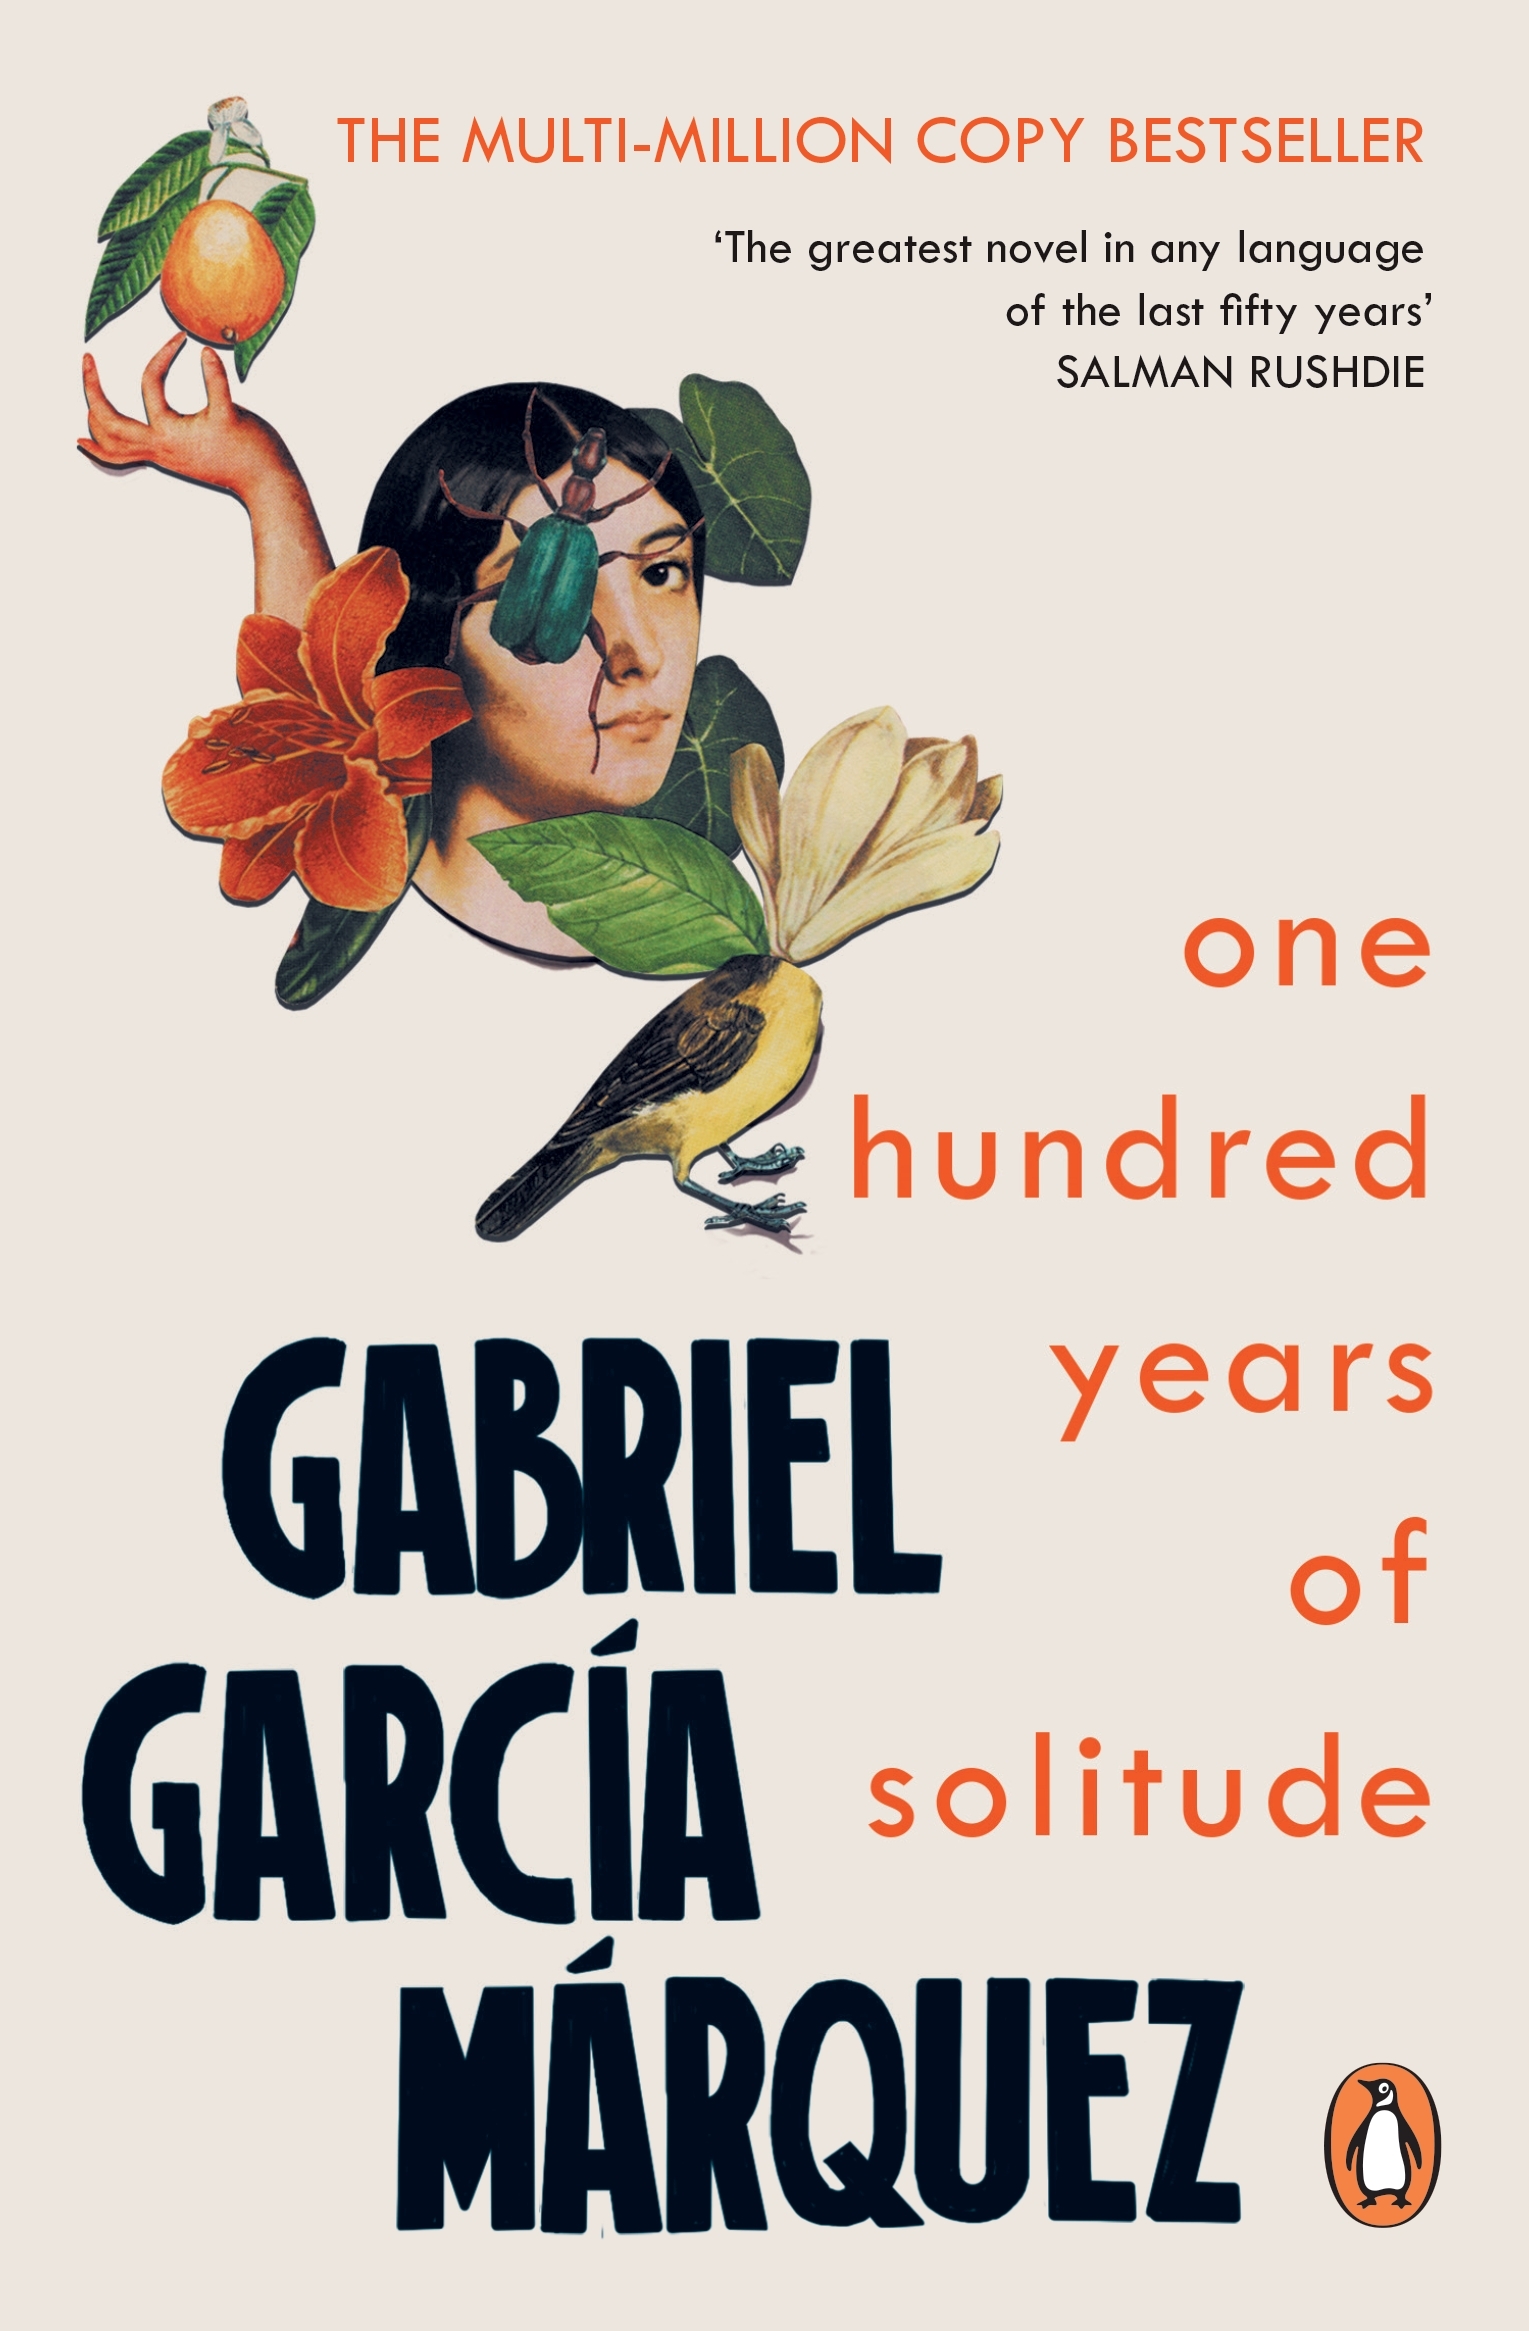 One Hundred Years of Solitude by Gabriel Garcia Marquez - Penguin Books - One Hundred Years Of Solitude Time